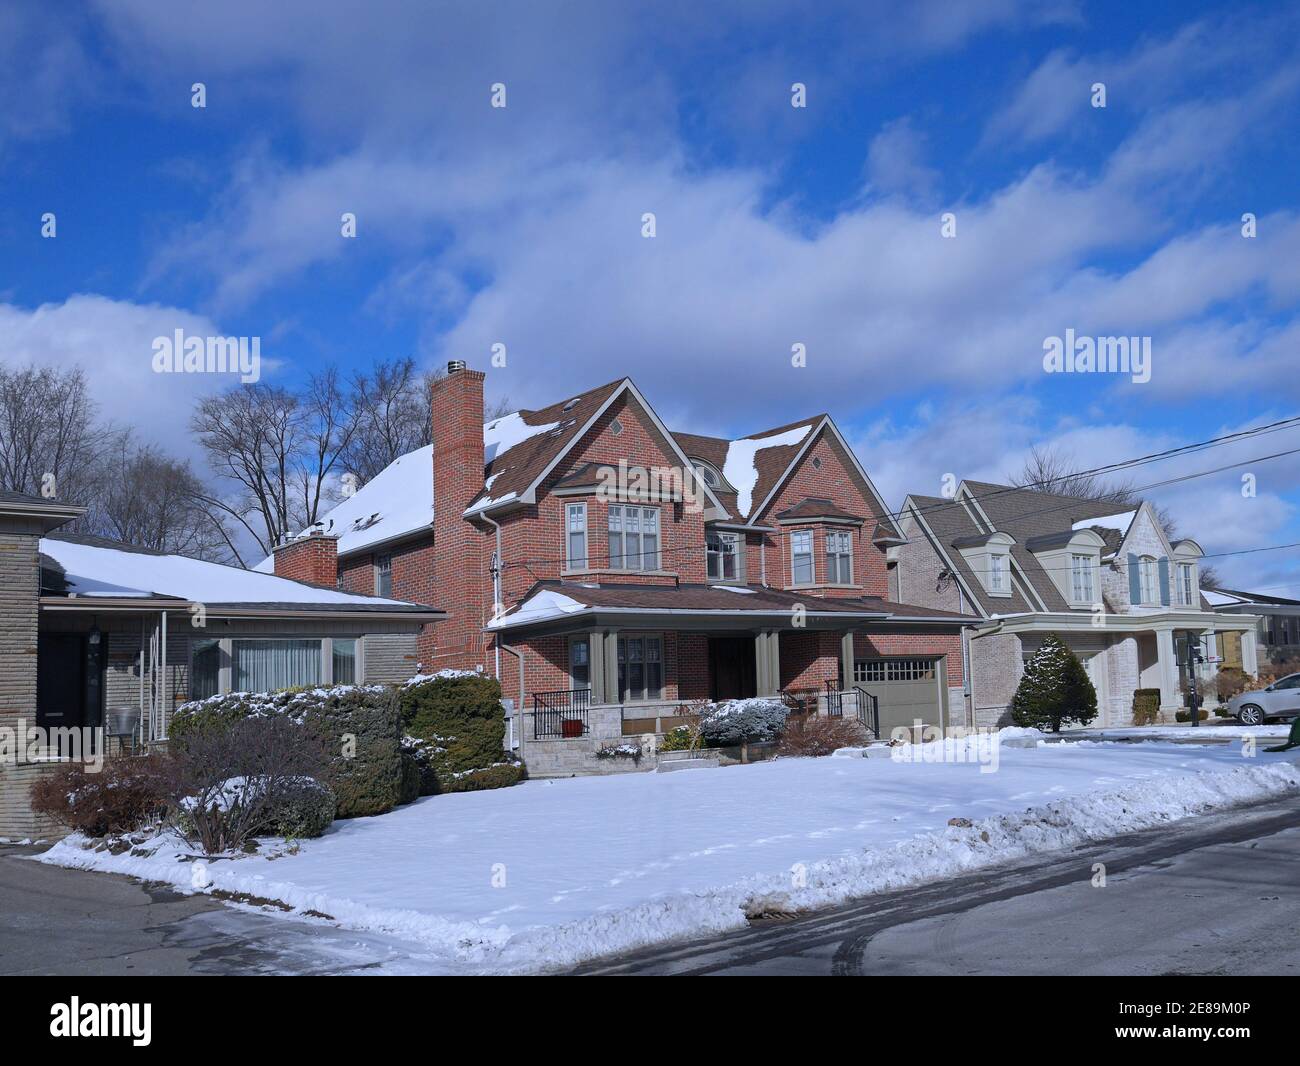 Suburban Residential neighborhood with single family houses with large front yards on a sunny day in winter Stock Photo